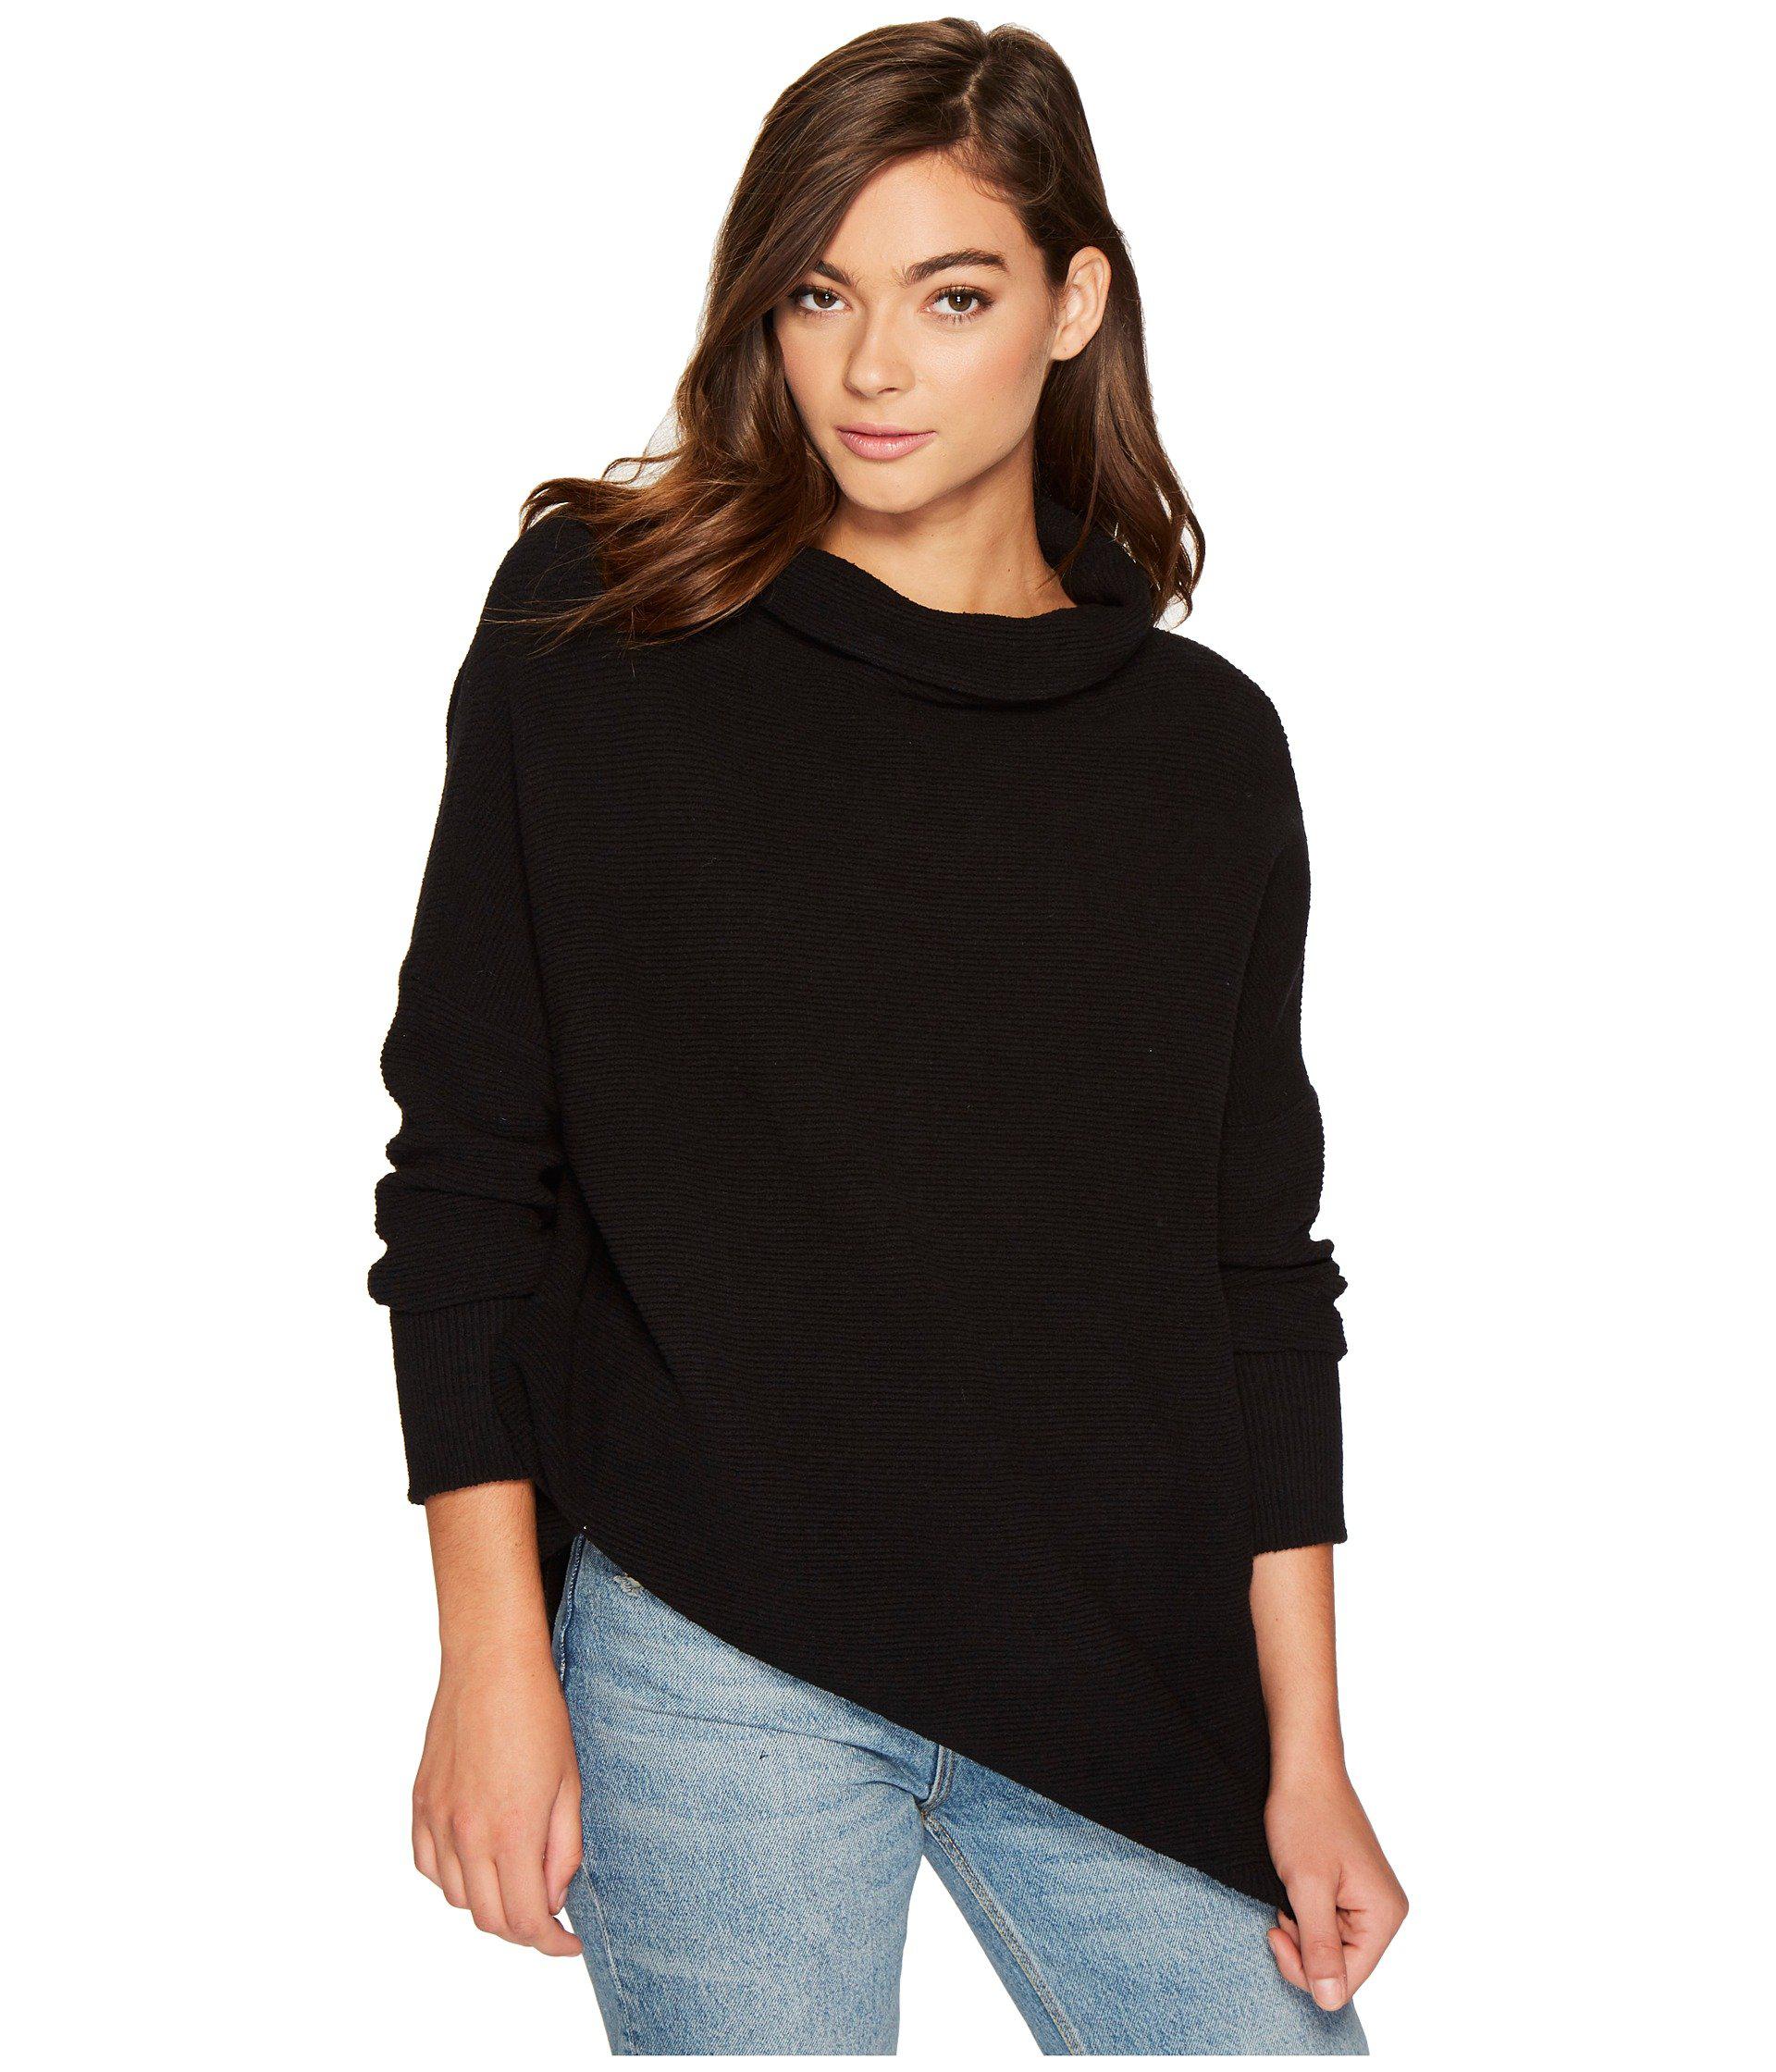 Free People Cotton Ottoman Slouchy Tunic in Black - Lyst